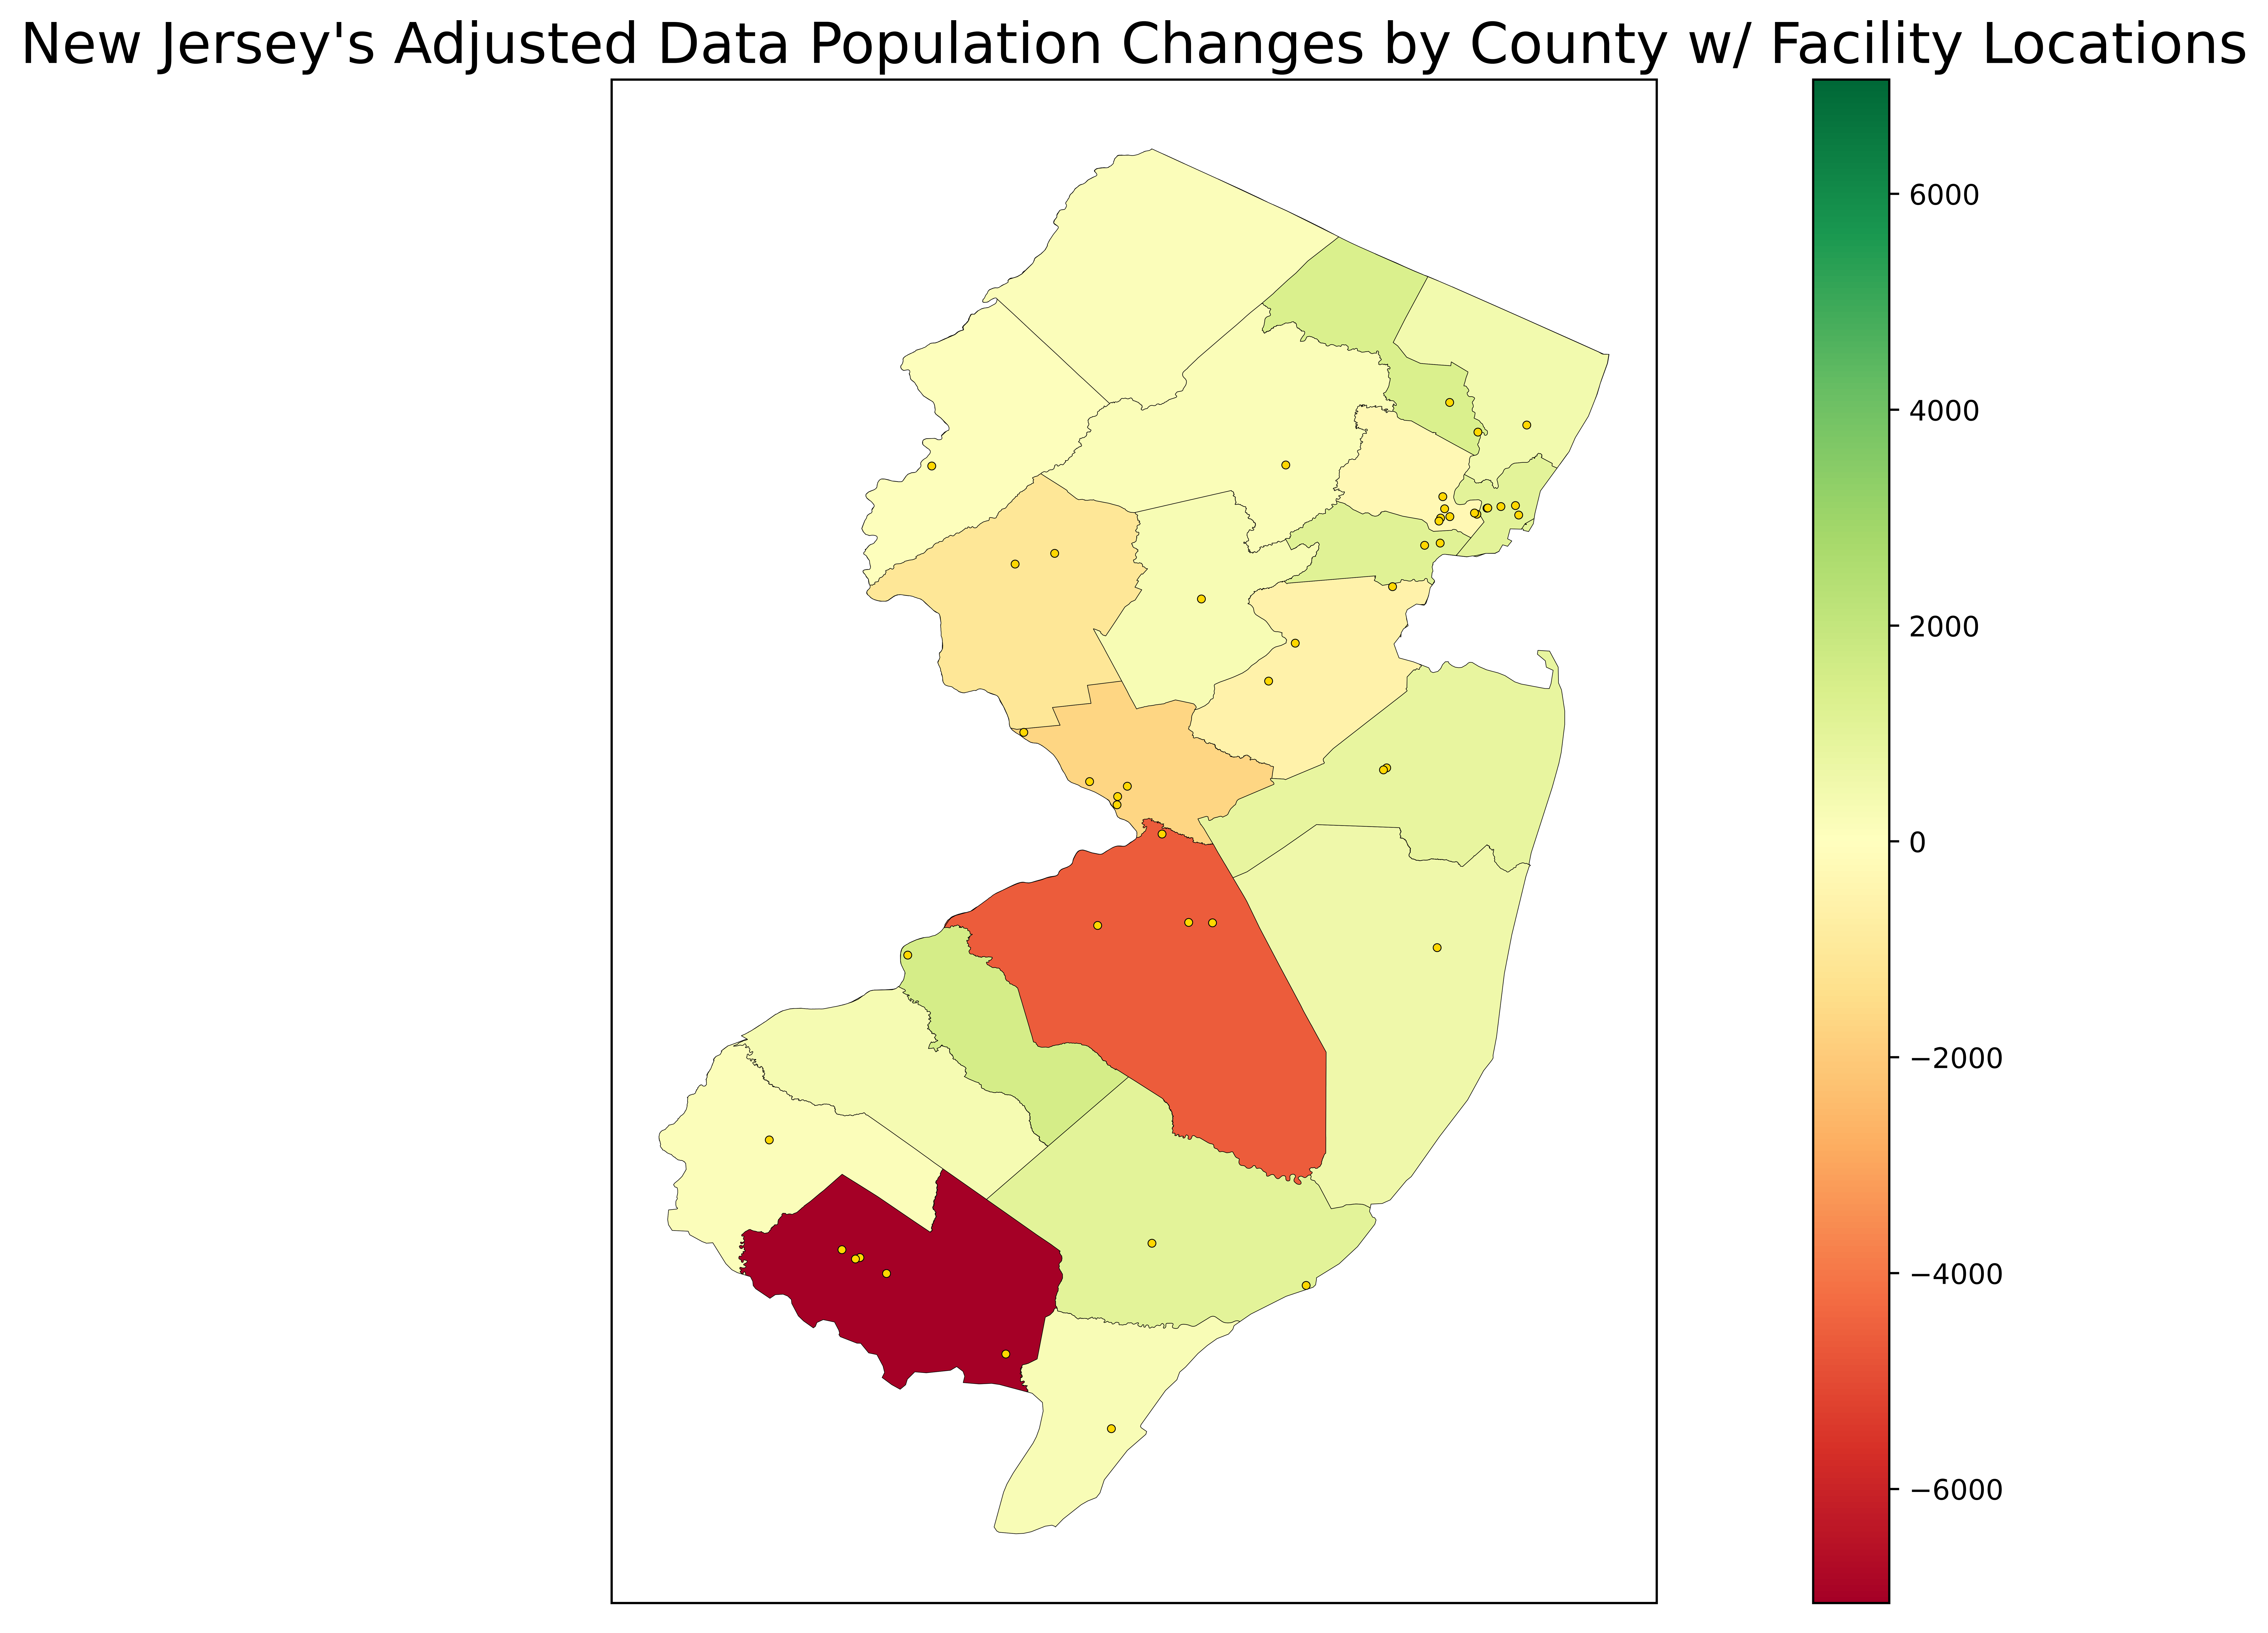 New Jersey's Adjusted Data Population Changes by County with Facility Locations